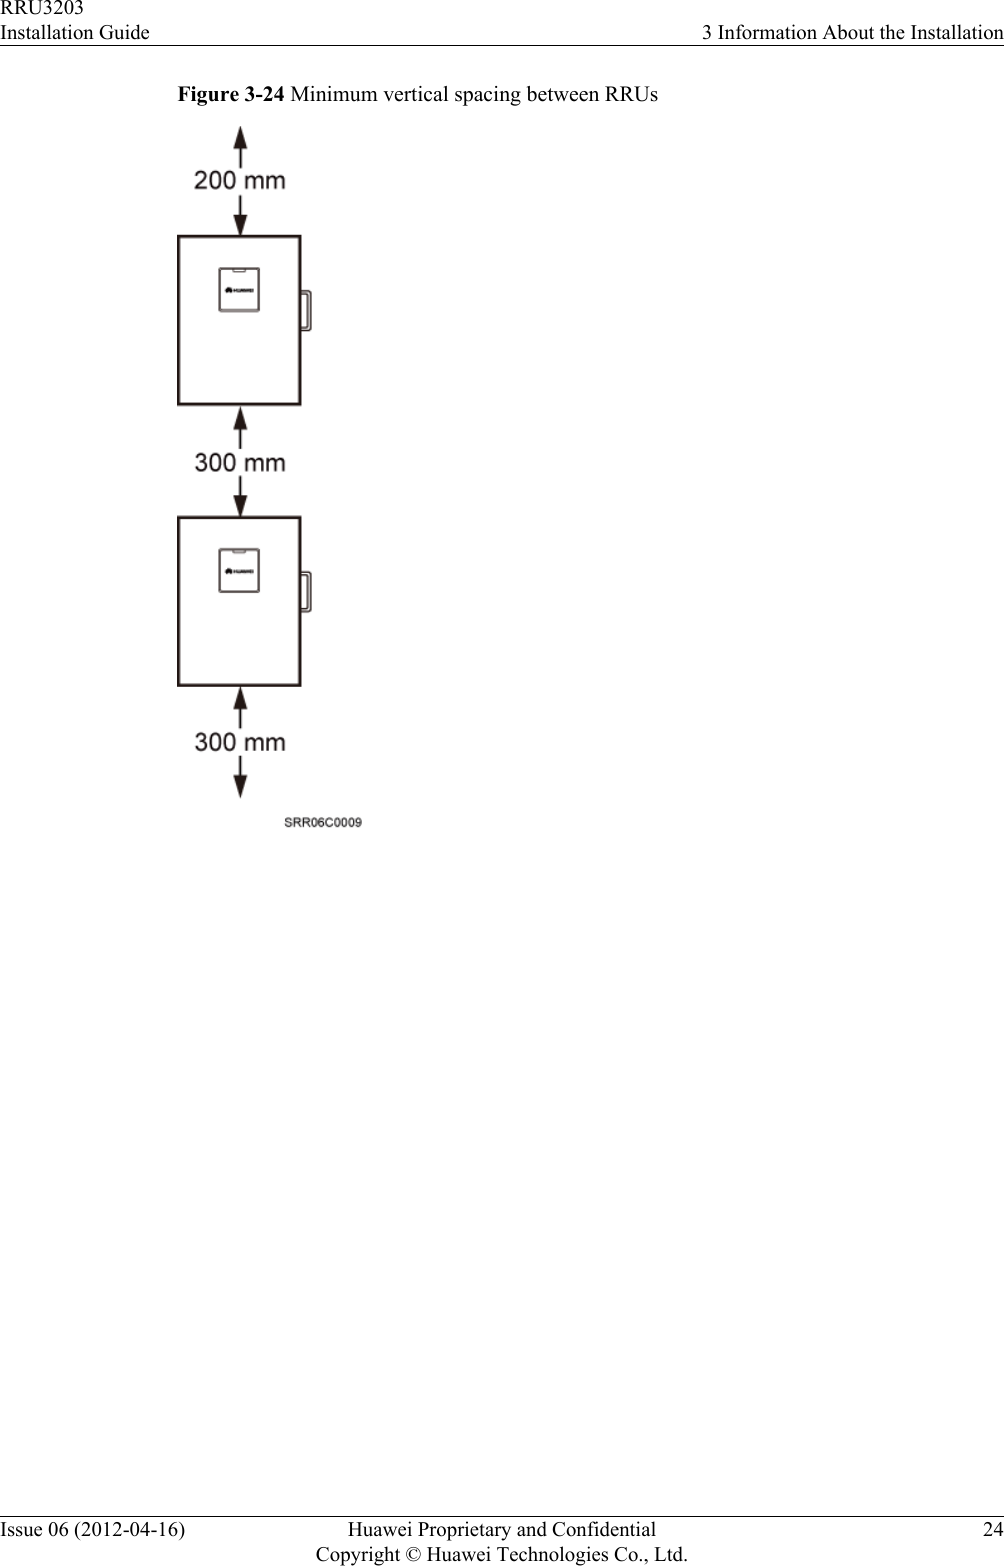 Figure 3-24 Minimum vertical spacing between RRUsRRU3203Installation Guide 3 Information About the InstallationIssue 06 (2012-04-16) Huawei Proprietary and ConfidentialCopyright © Huawei Technologies Co., Ltd.24